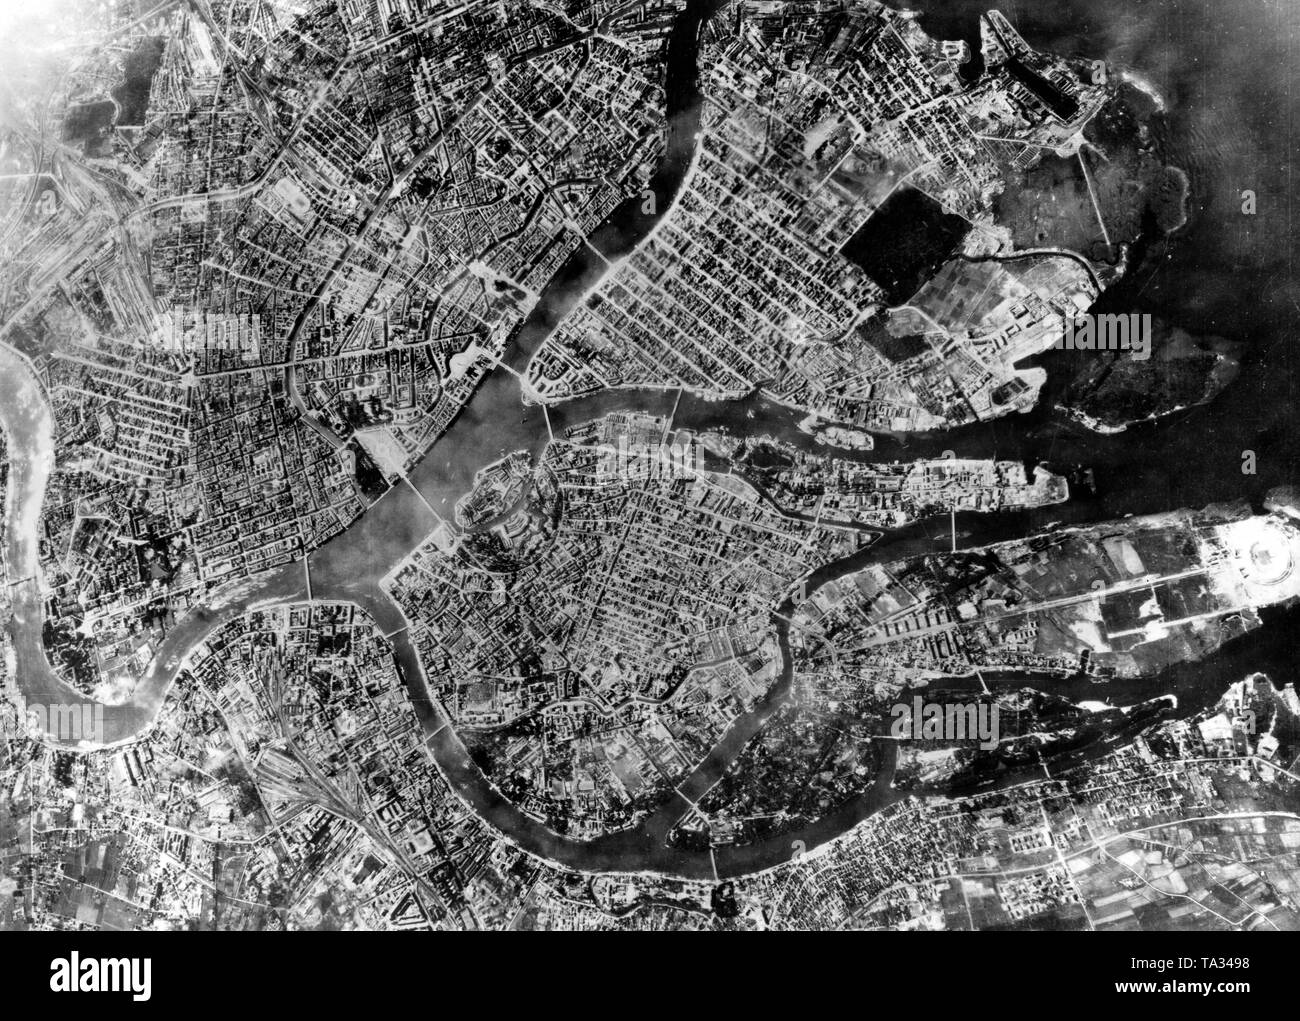 Photo of Leningrad (St. Petersburg) taken from of a reconnaissance aircraft of the Luftwaffe. Stock Photo